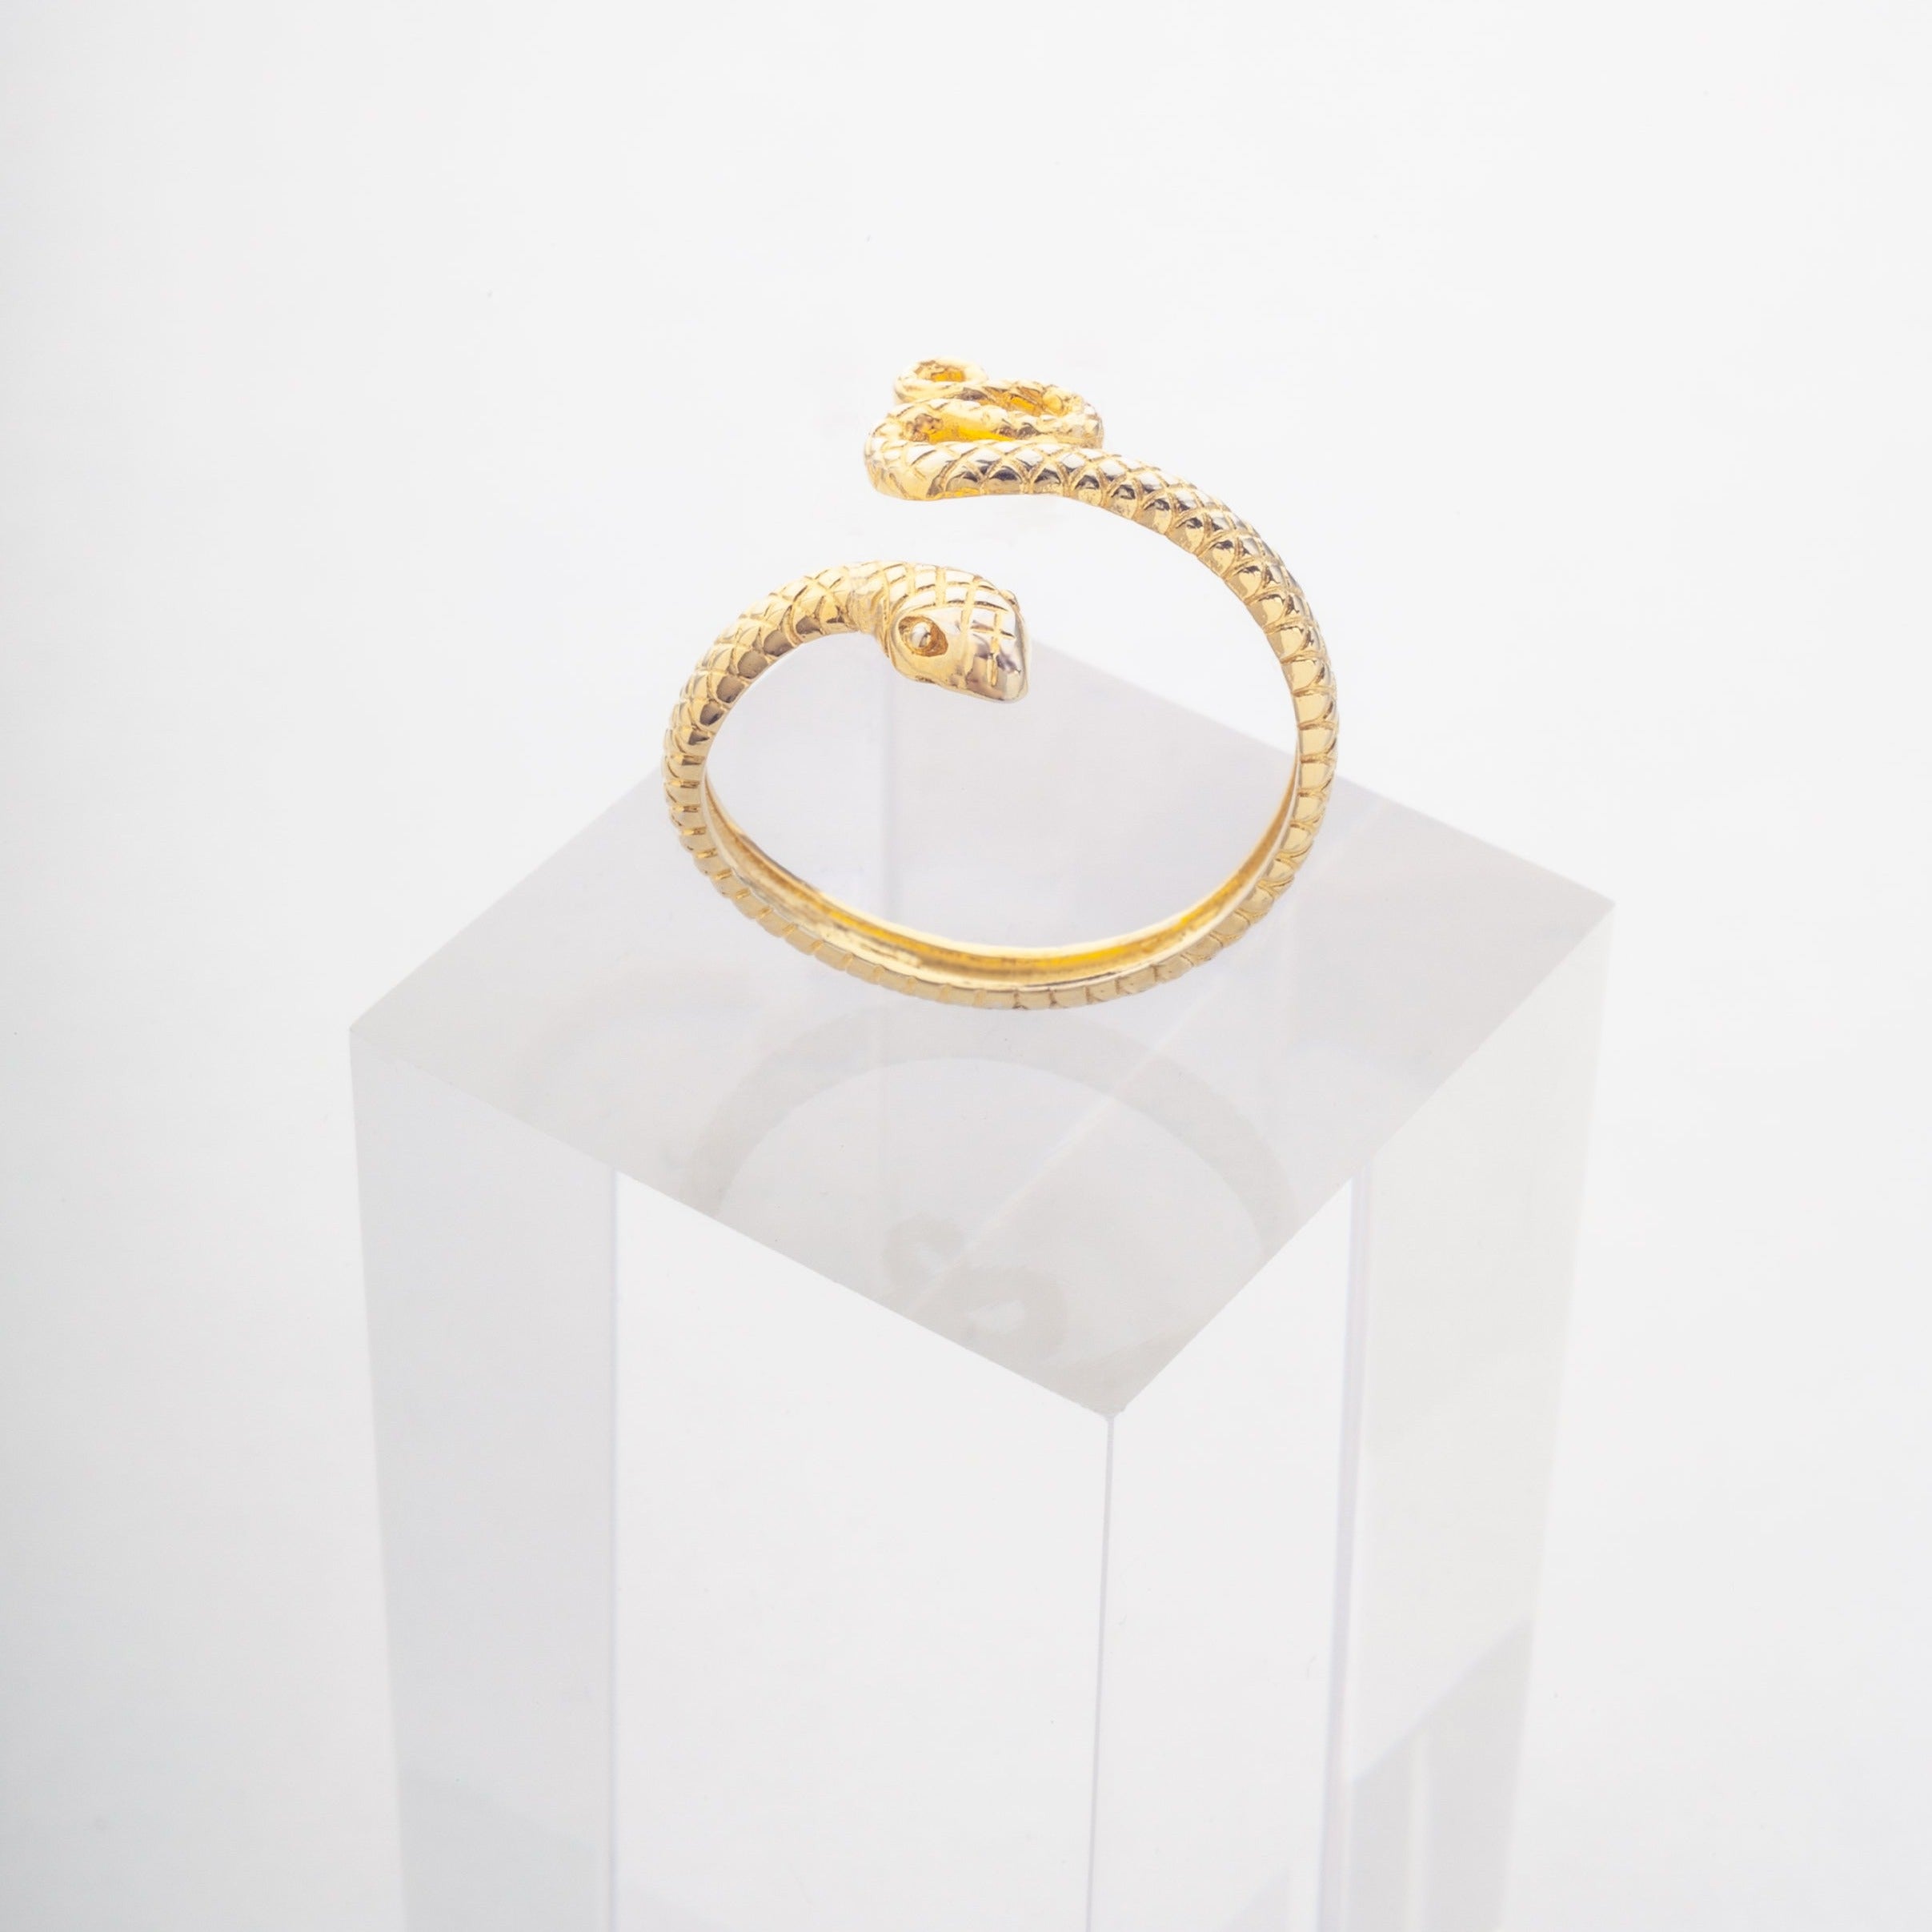 Serpent Ring in Gold